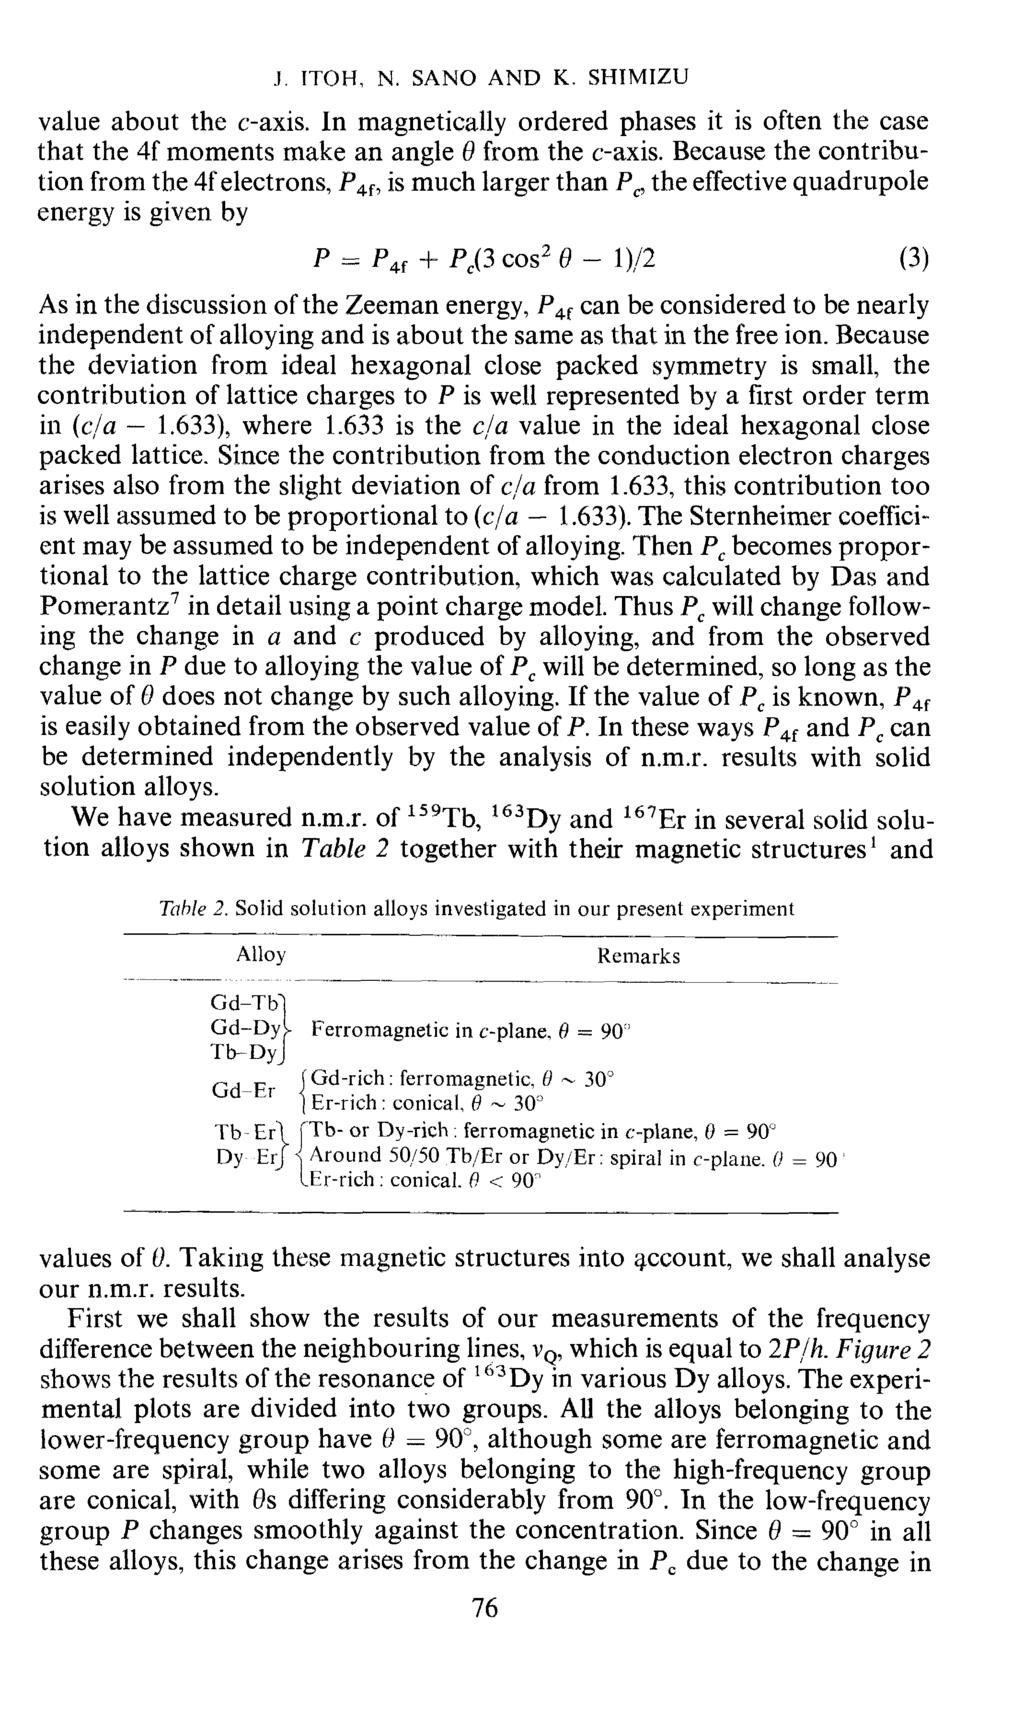 J. ITOH, N. SANO AND K. SHIMIZU value about the c-axis. In magnetically ordered phases it is often the case that the 4f moments make an angle 0 from the c-axis.